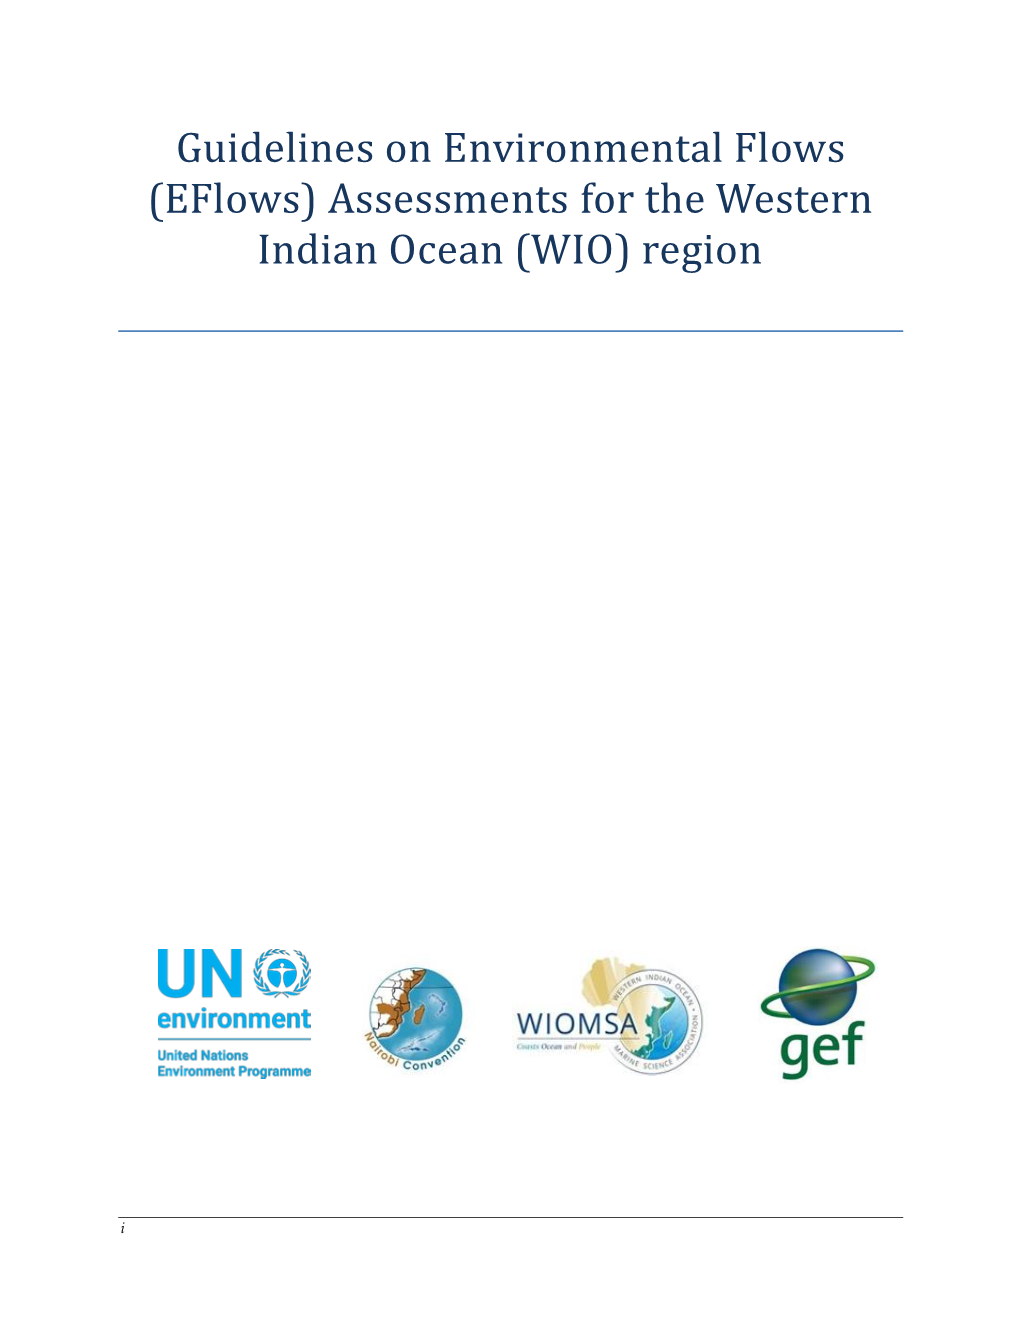 (Eflows) Assessments for the Western Indian Ocean (WIO) Region